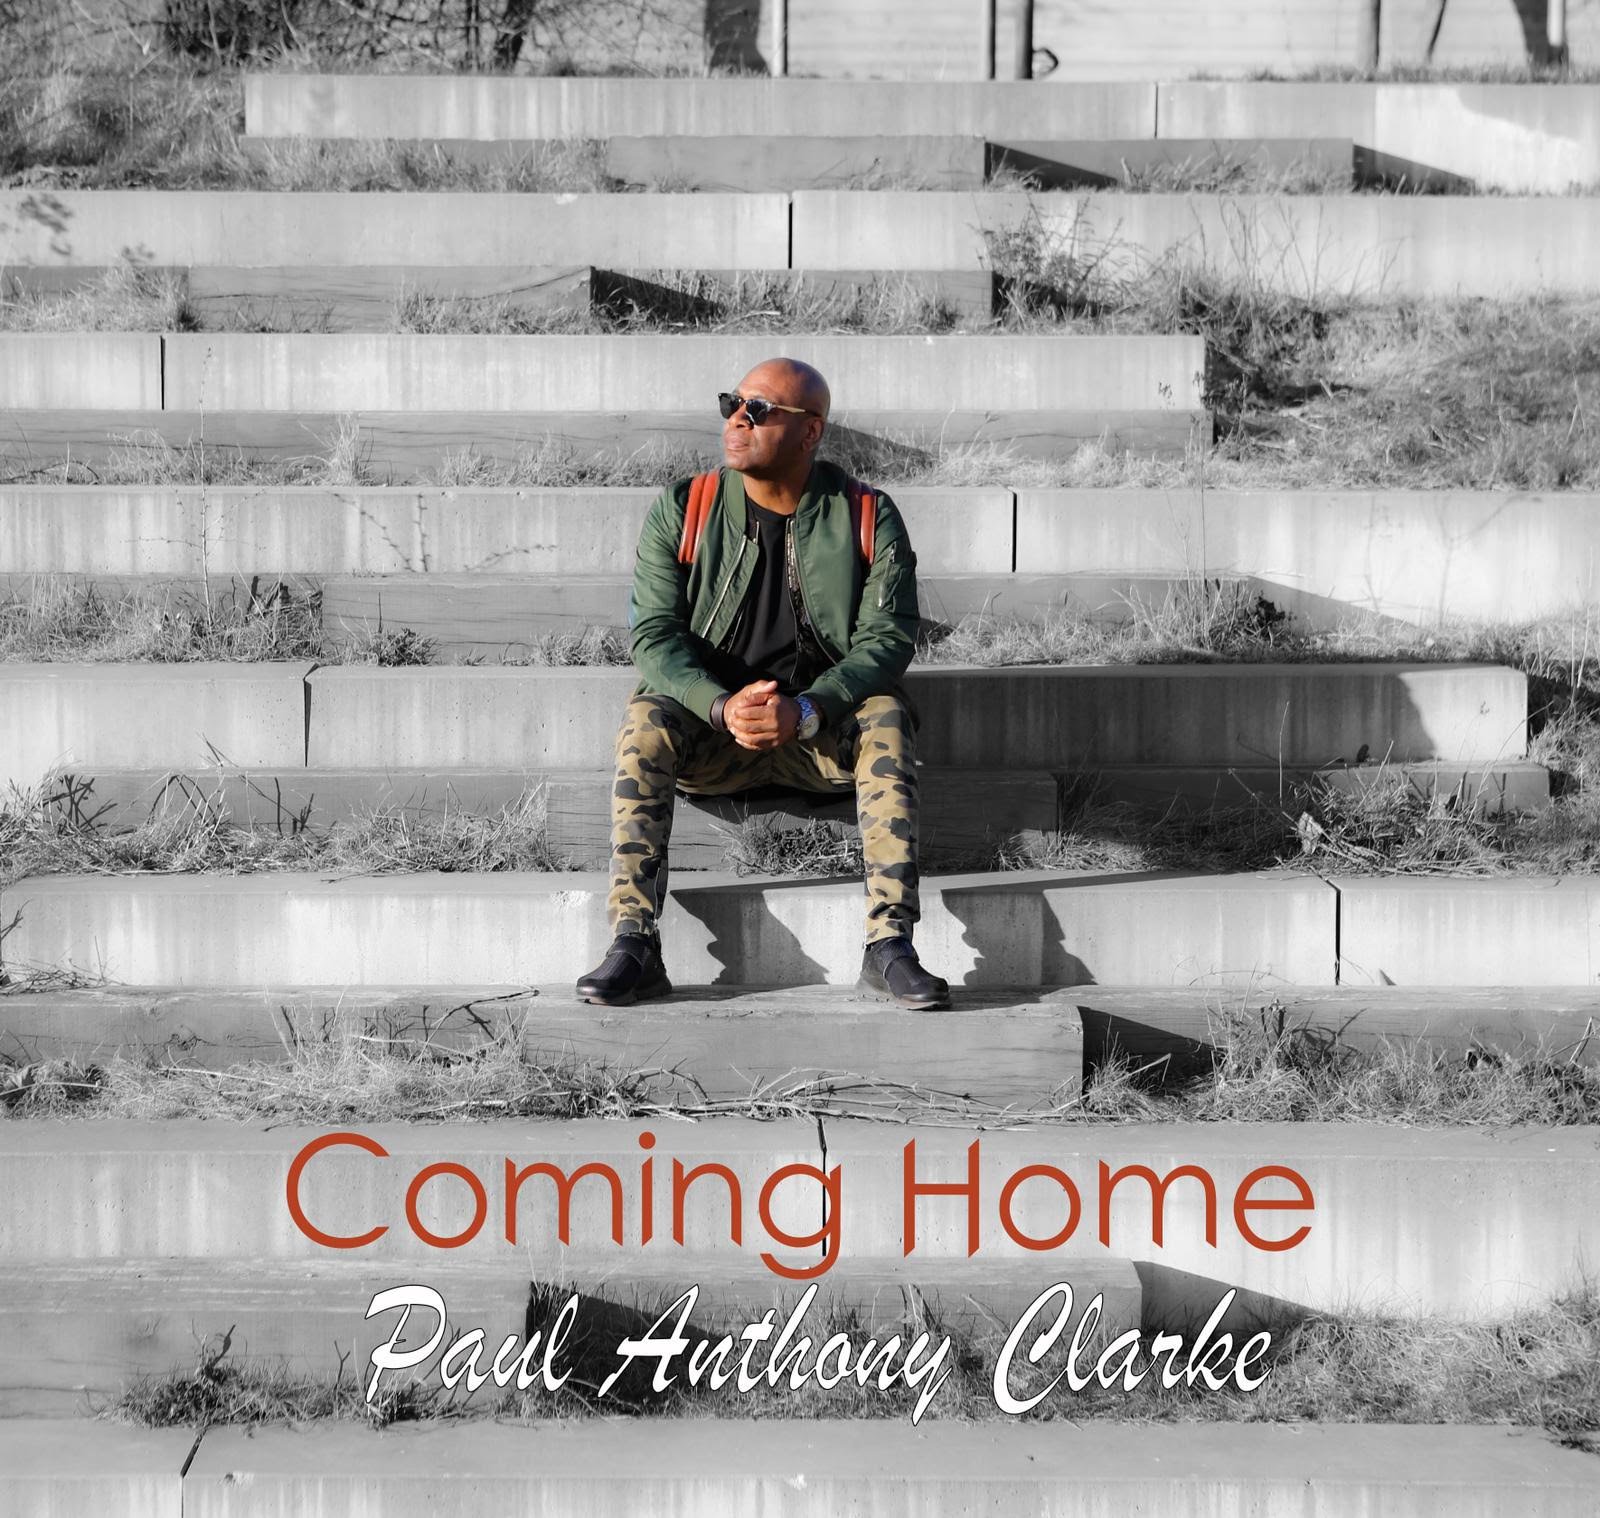 Coming Home by Paul Anthony Clarke